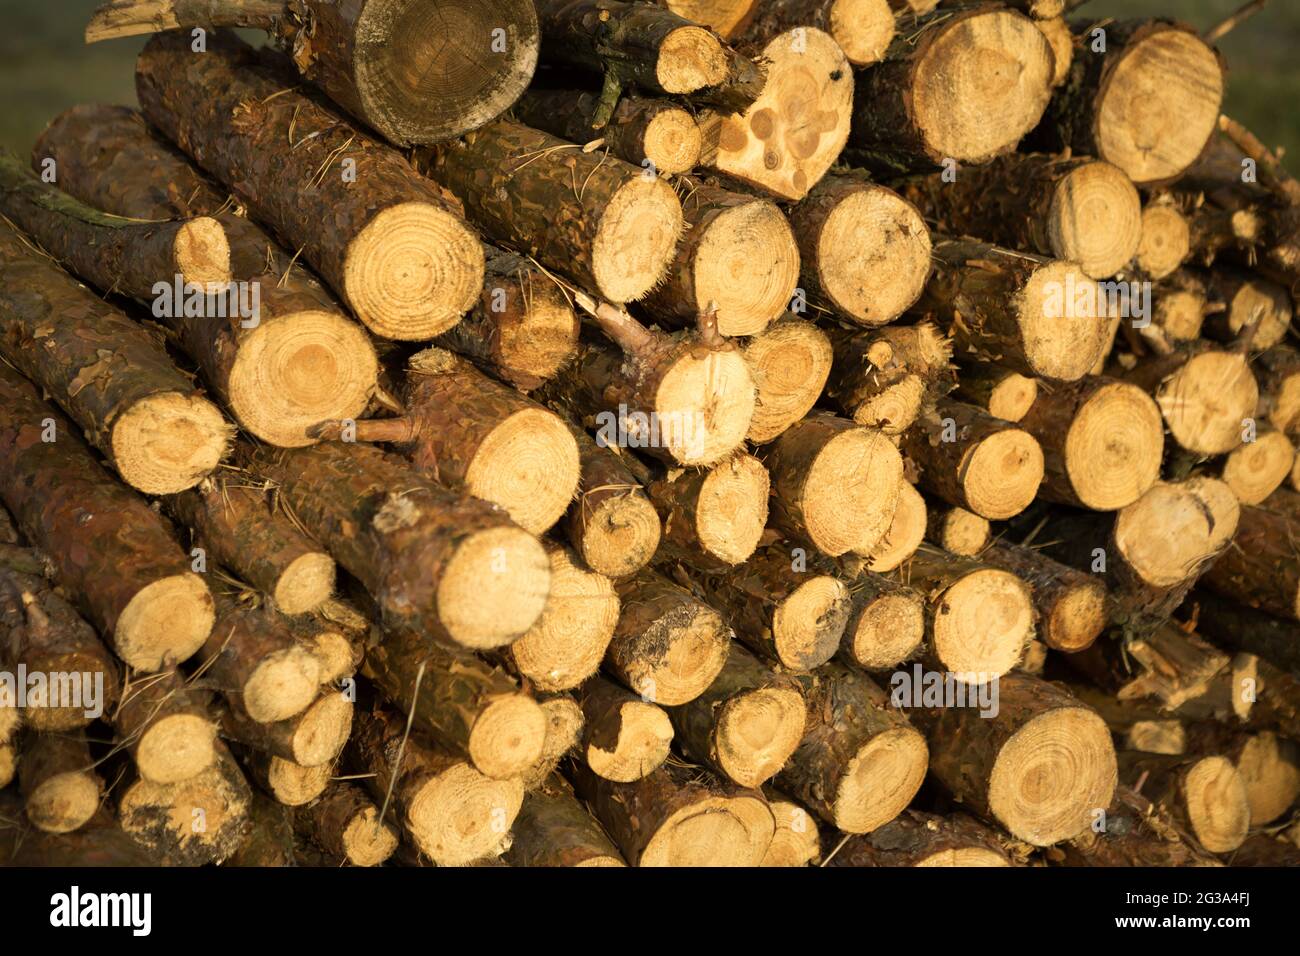 round-sections-of-logs-in-a-stack-with-firewood-close-up-wooden-rural-background-cottage-core-nature-ecology-solid-fuel-copy-space-2G3A4FJ.jpg